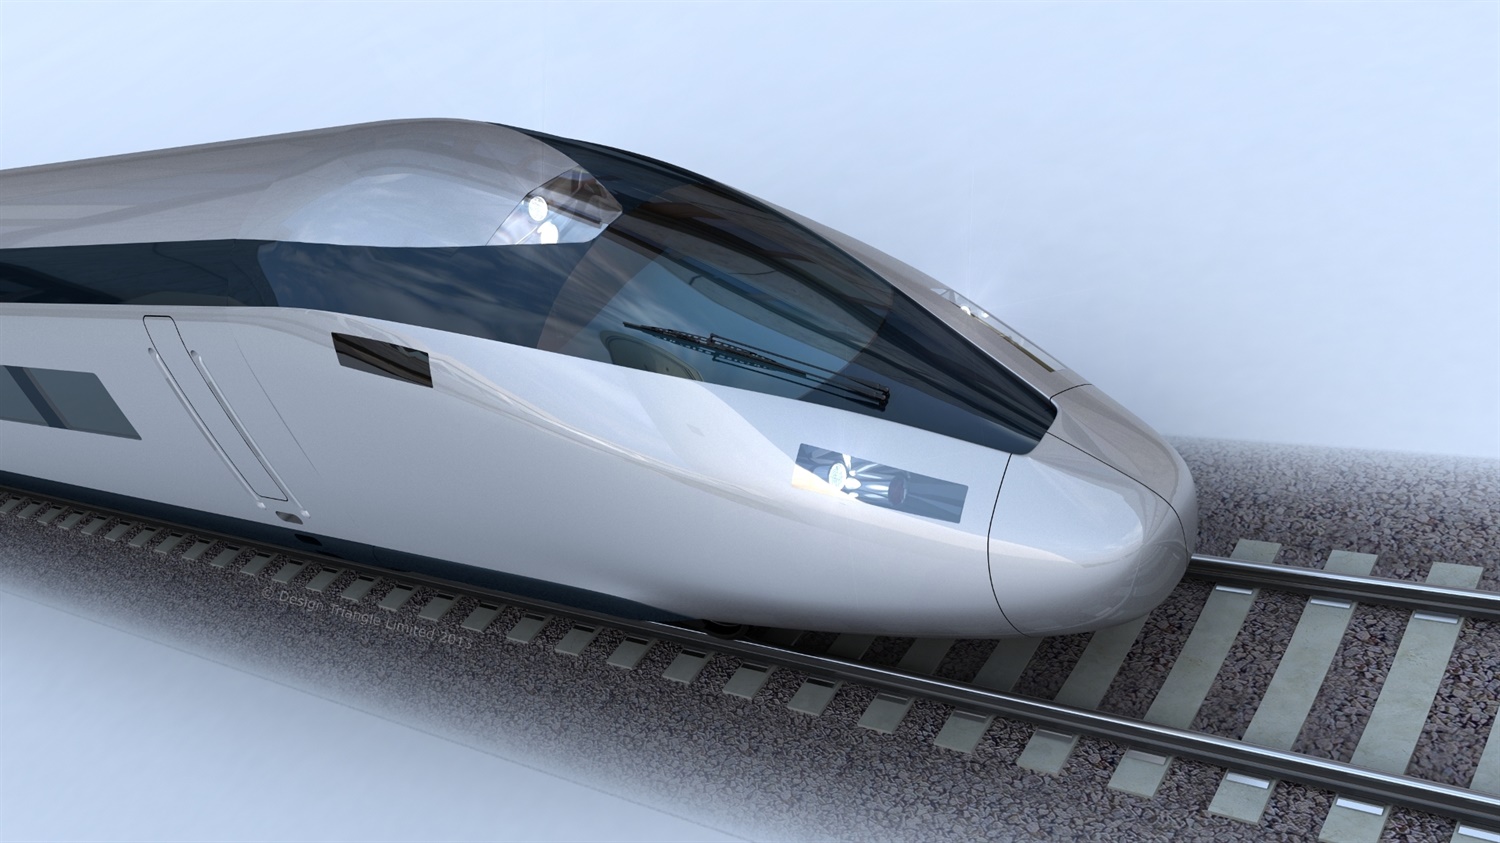 HS2 development partner award delayed as losing firm launches query